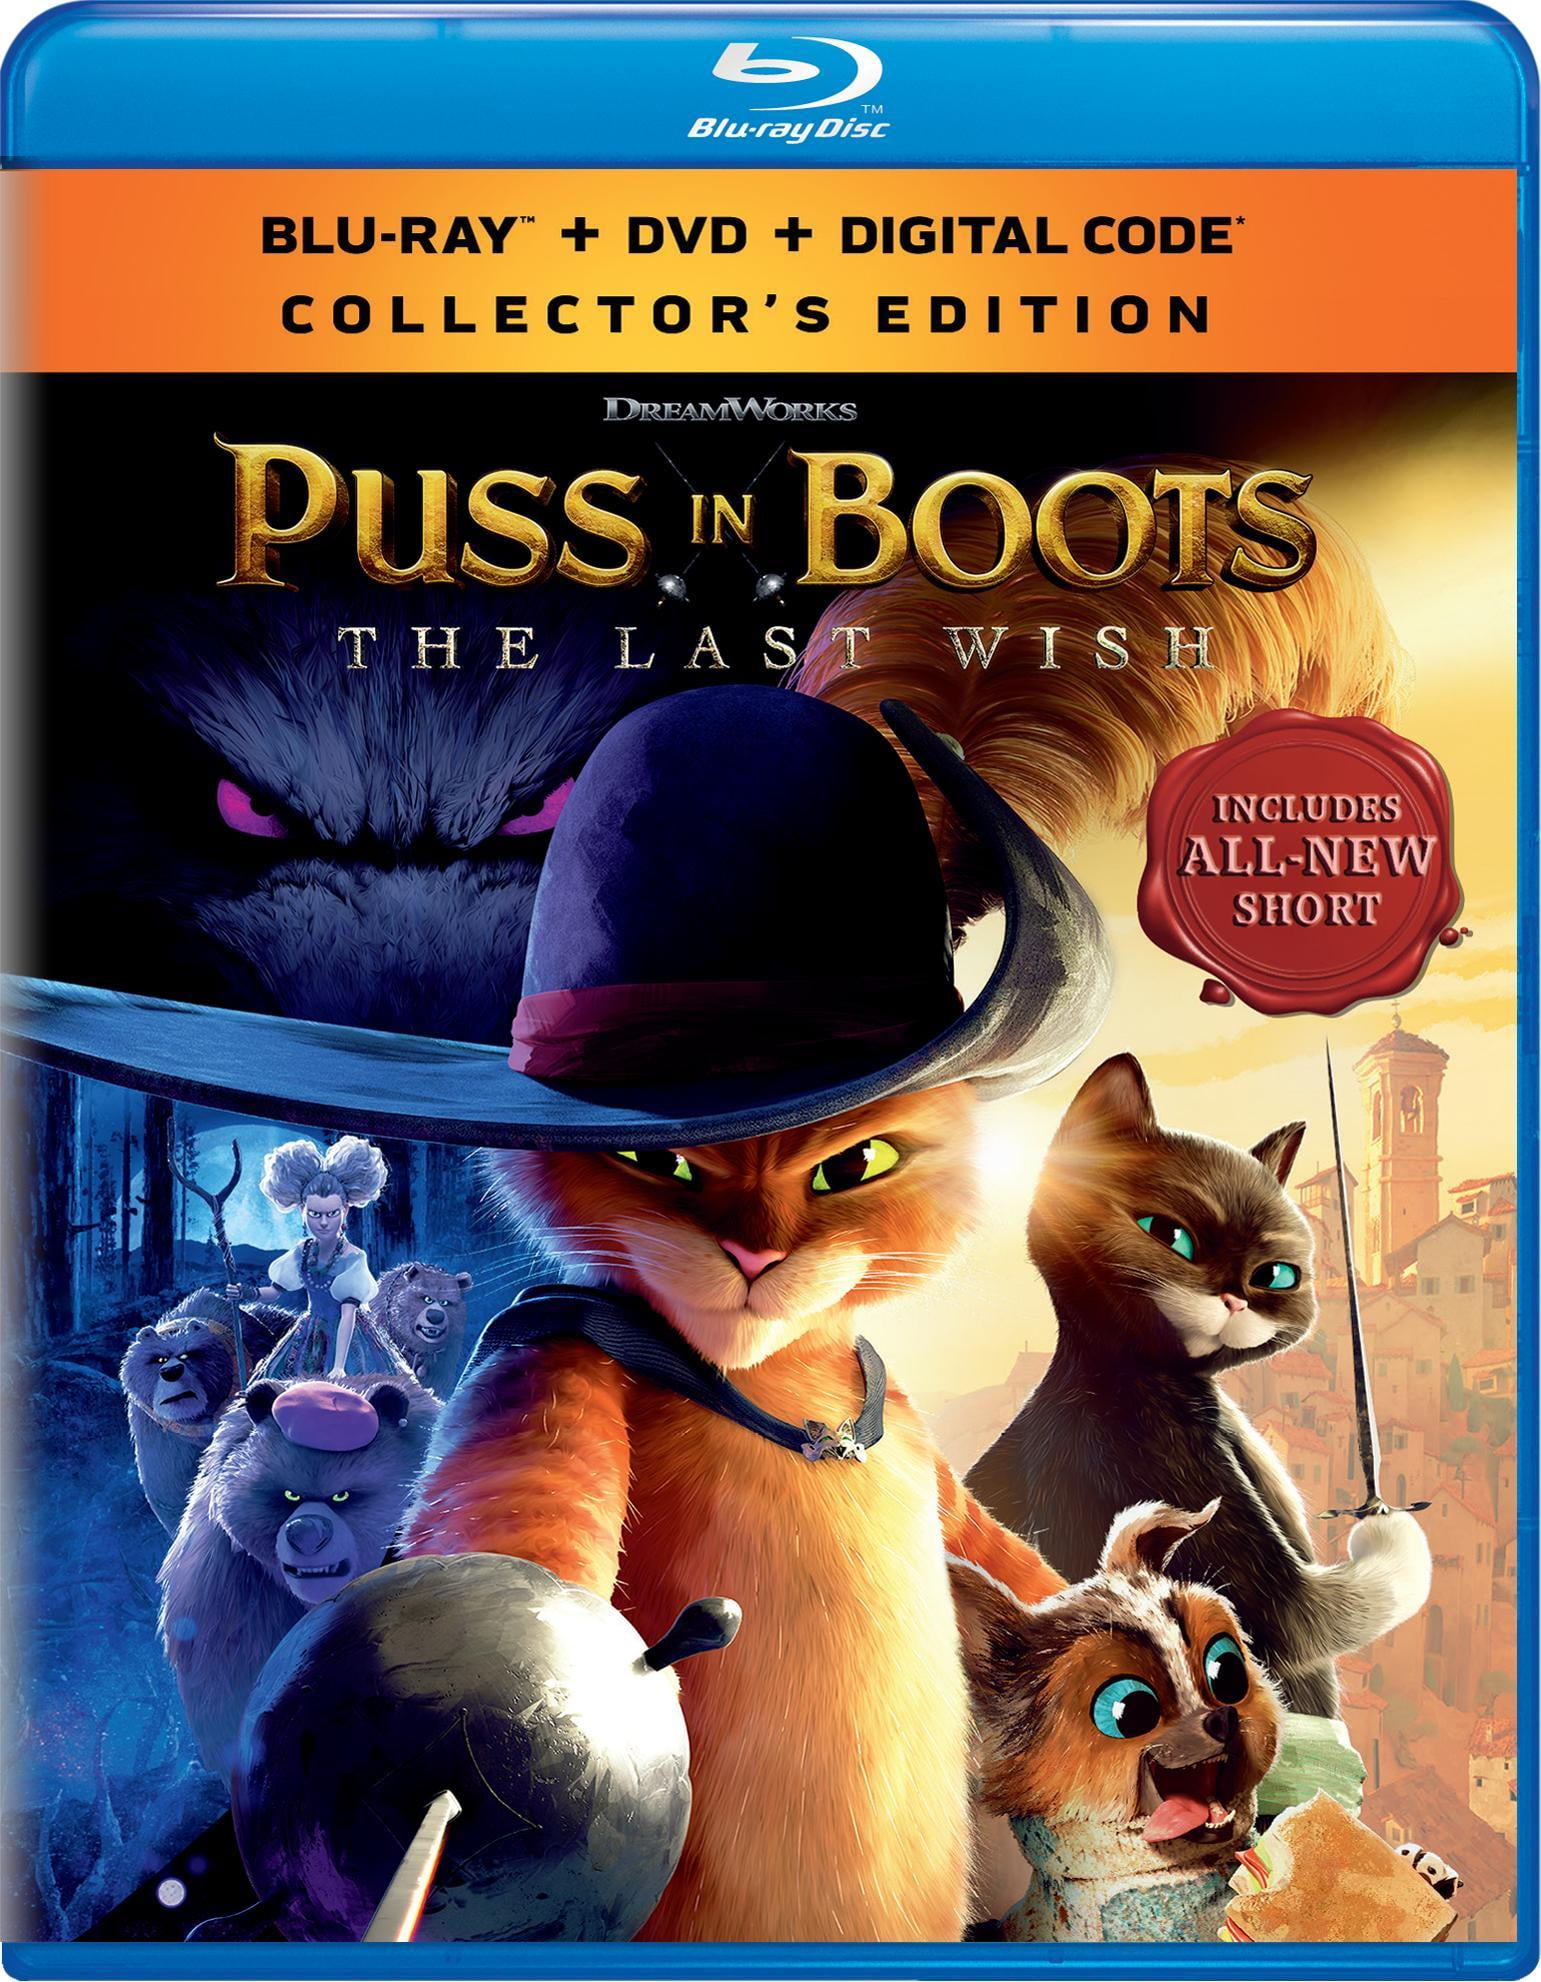 Puss In Boots: The Last Wish (Blu-ray DVD Digital Copy) | lupon.gov.ph